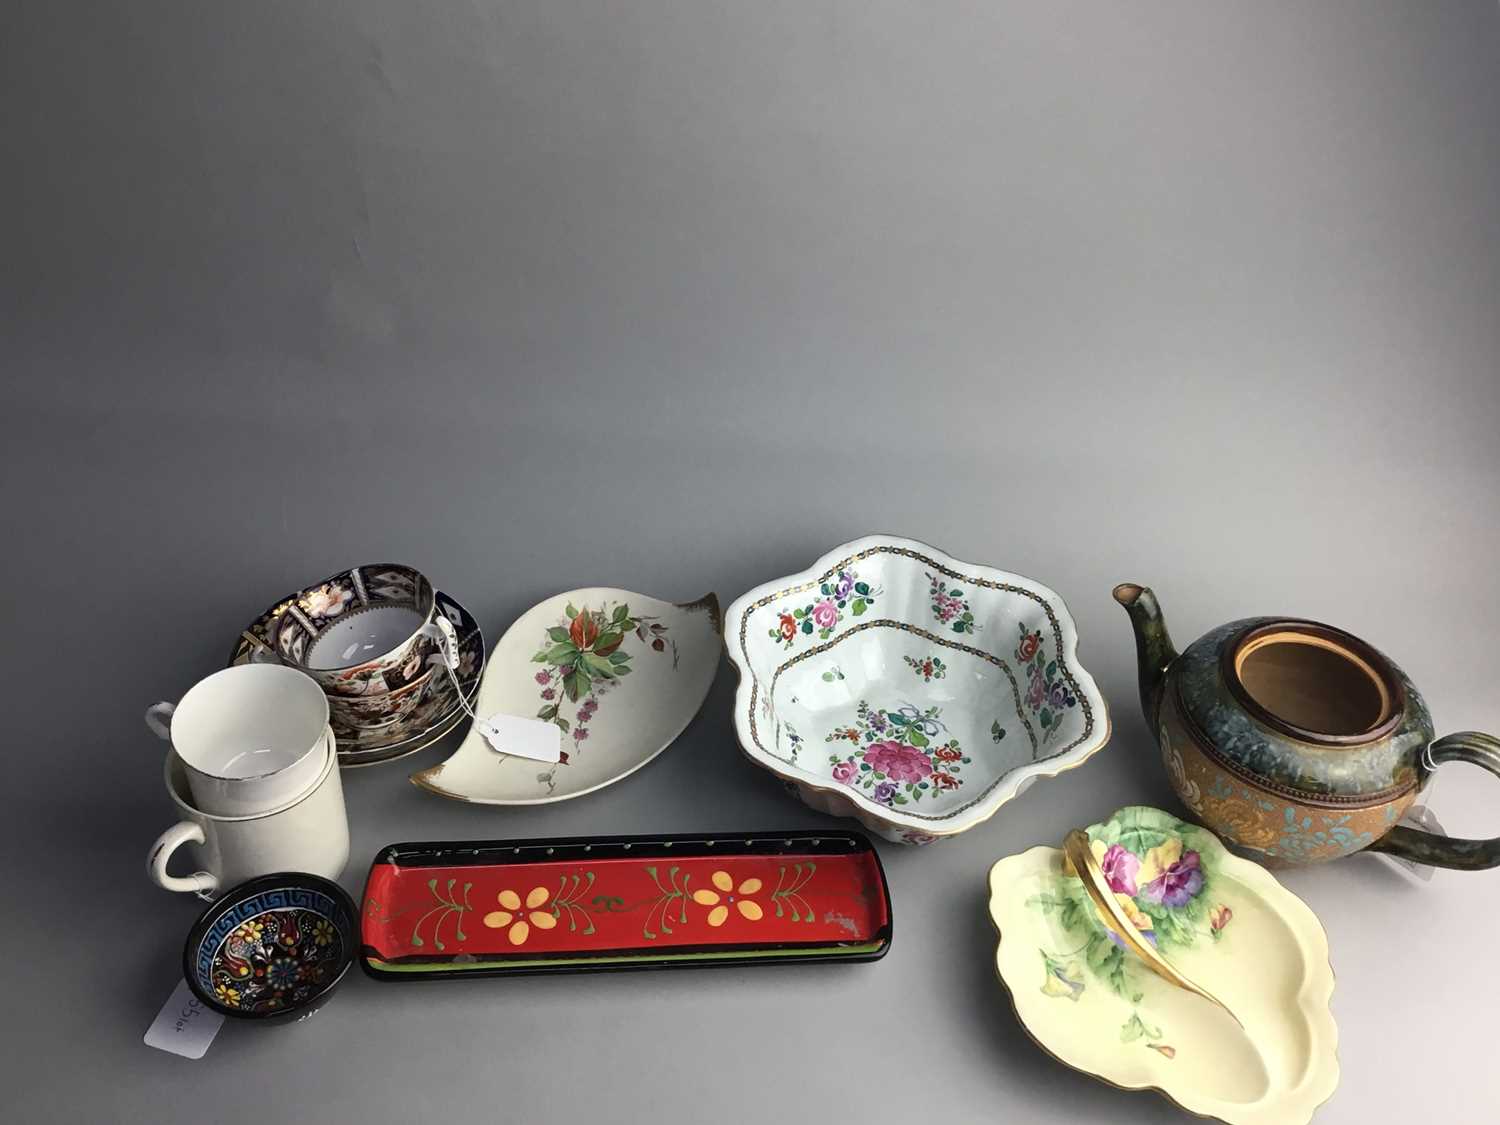 Lot 55 - A PAIR OF ROYAL CROWN DERBY BLOOR IMARI TEACUPS AND SAUCERS AND OTHER CERAMICS